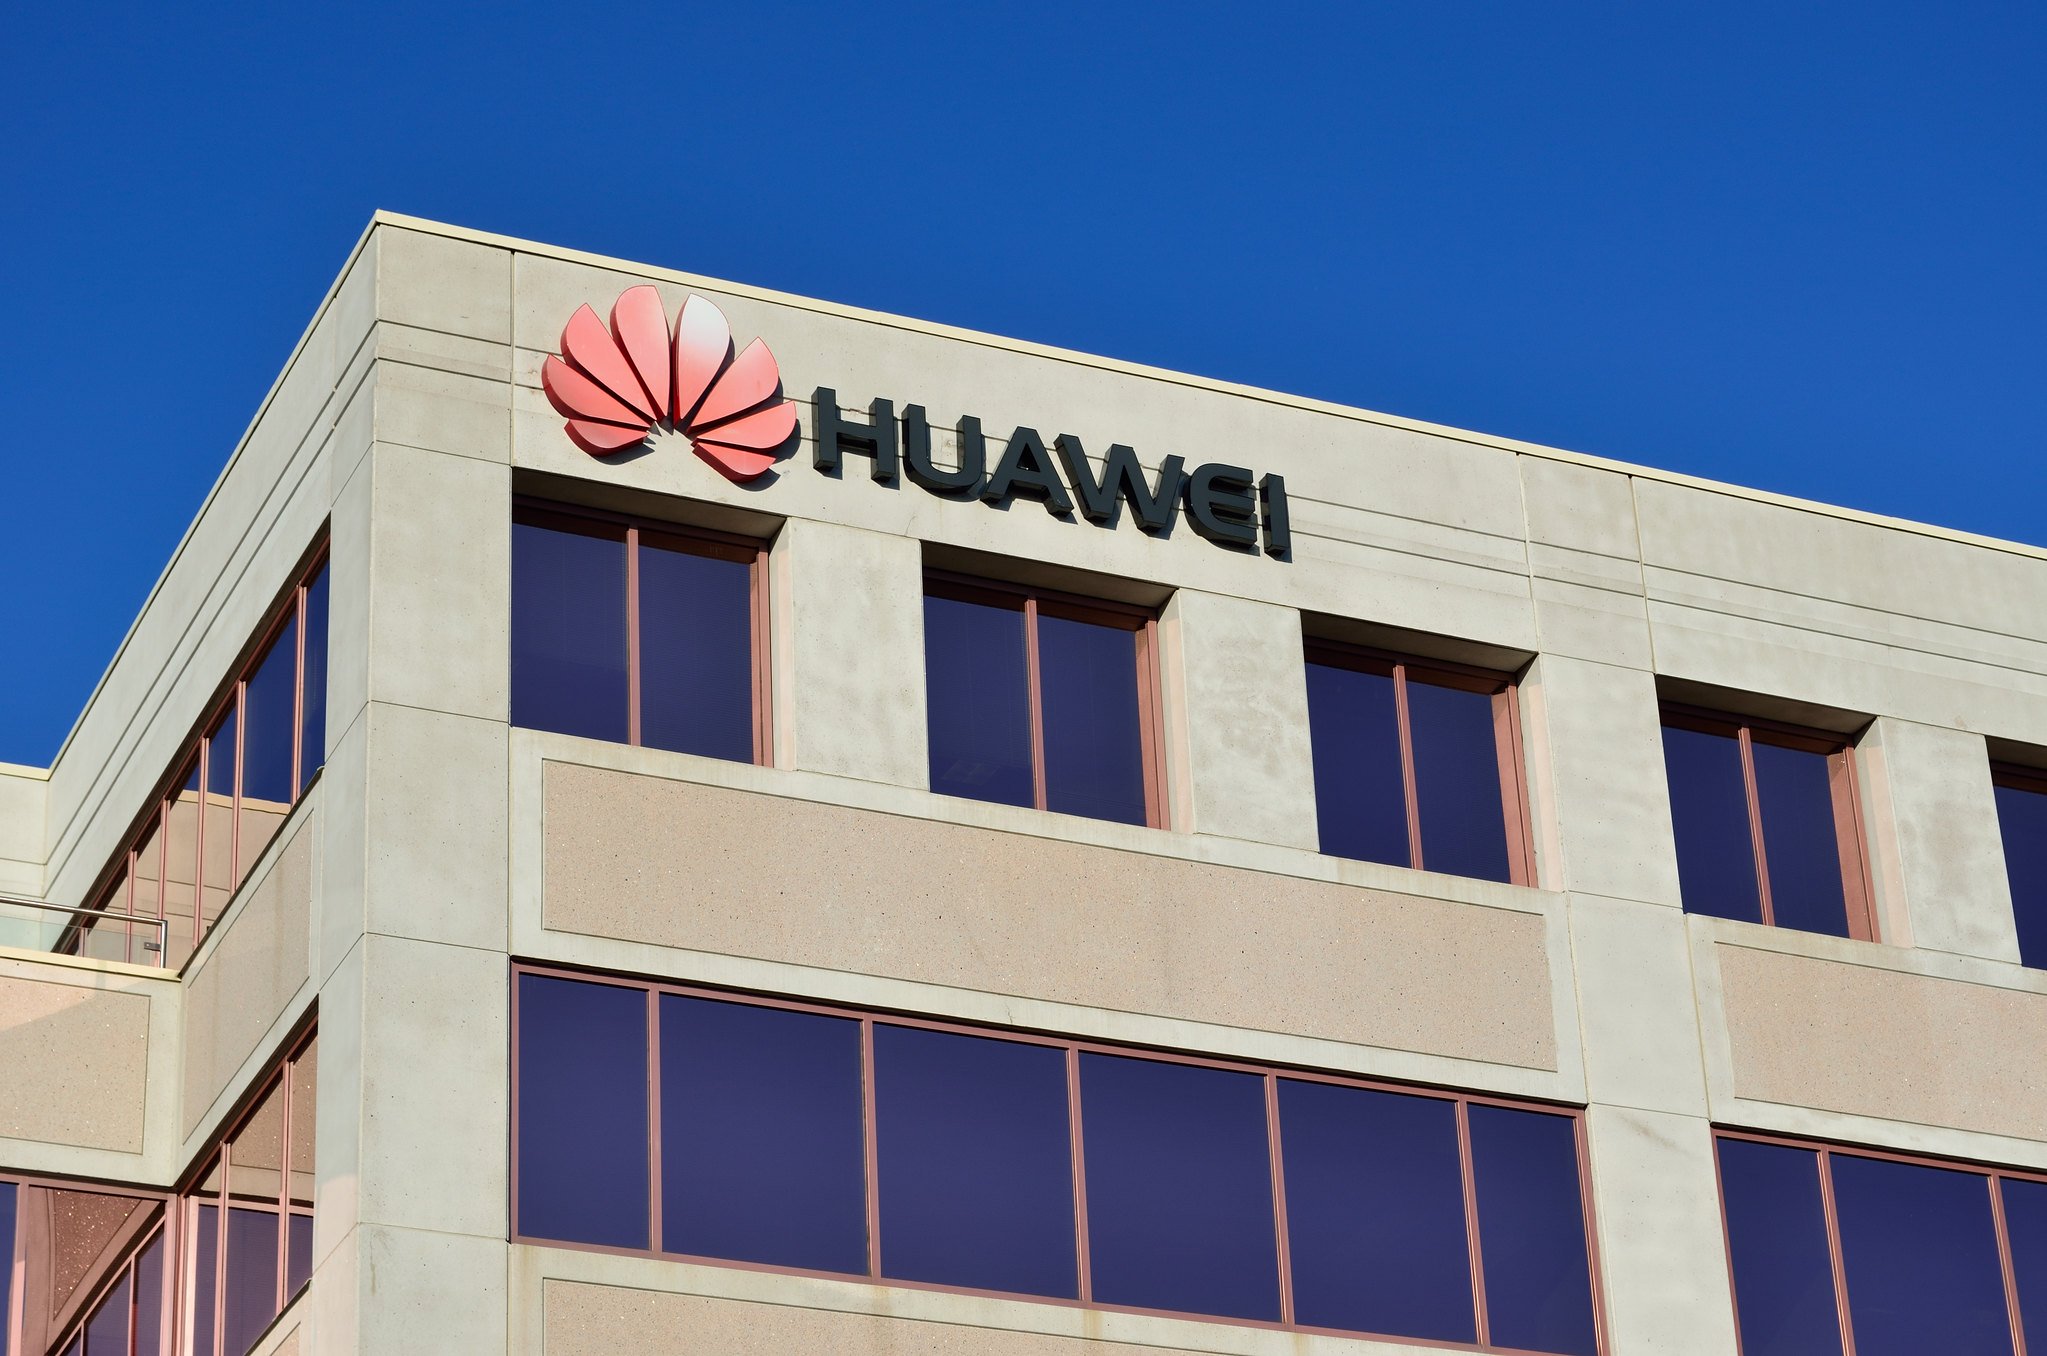 Huawei ban will cost UK Telecom Operators £2 Billion and delay 5G by 2-3 years